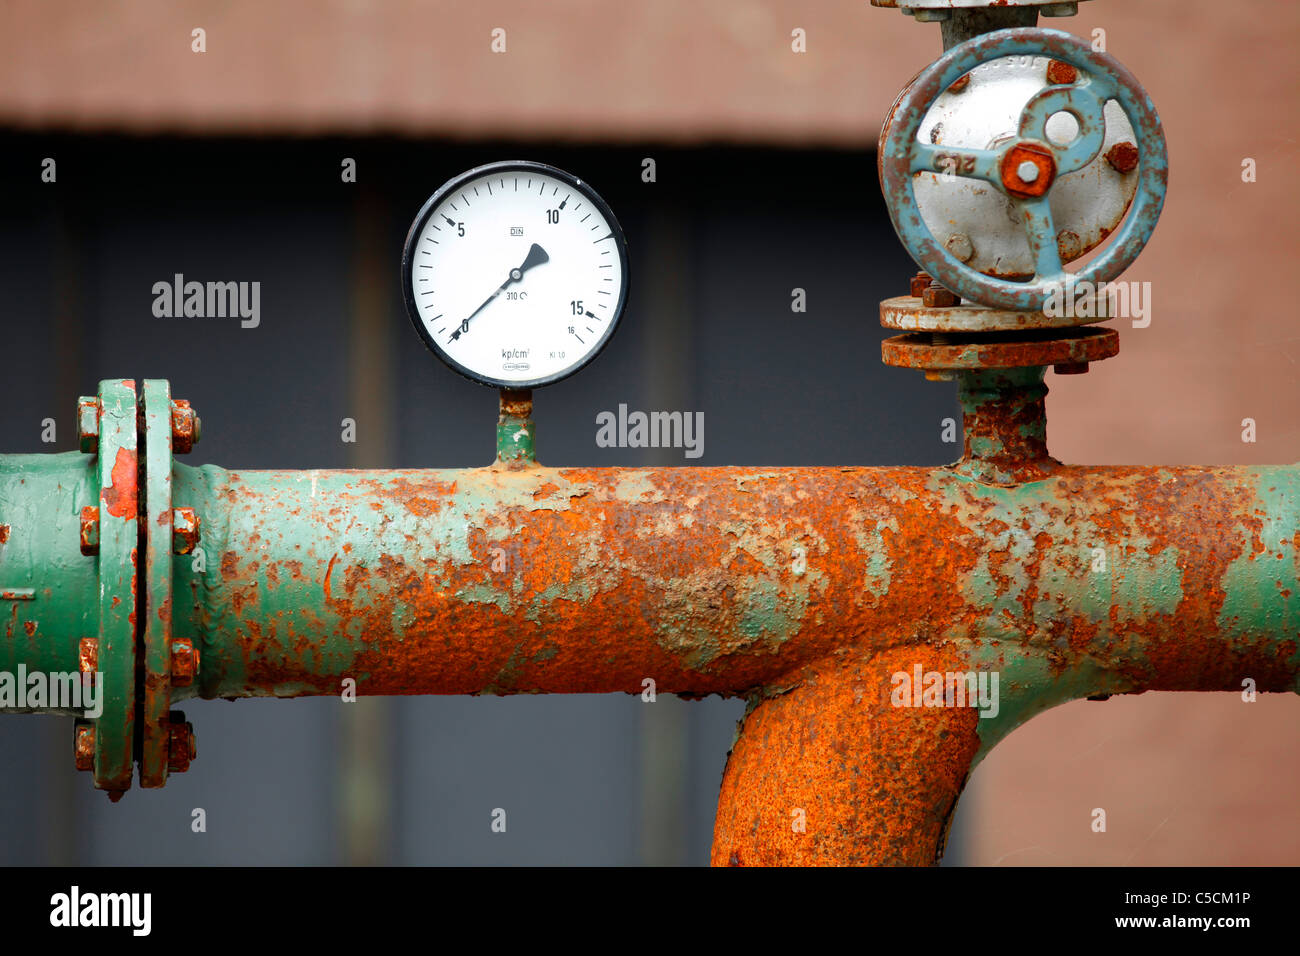 Old and rusty pipes and pressure indicator, of an old and closed industrial complex. Stock Photo